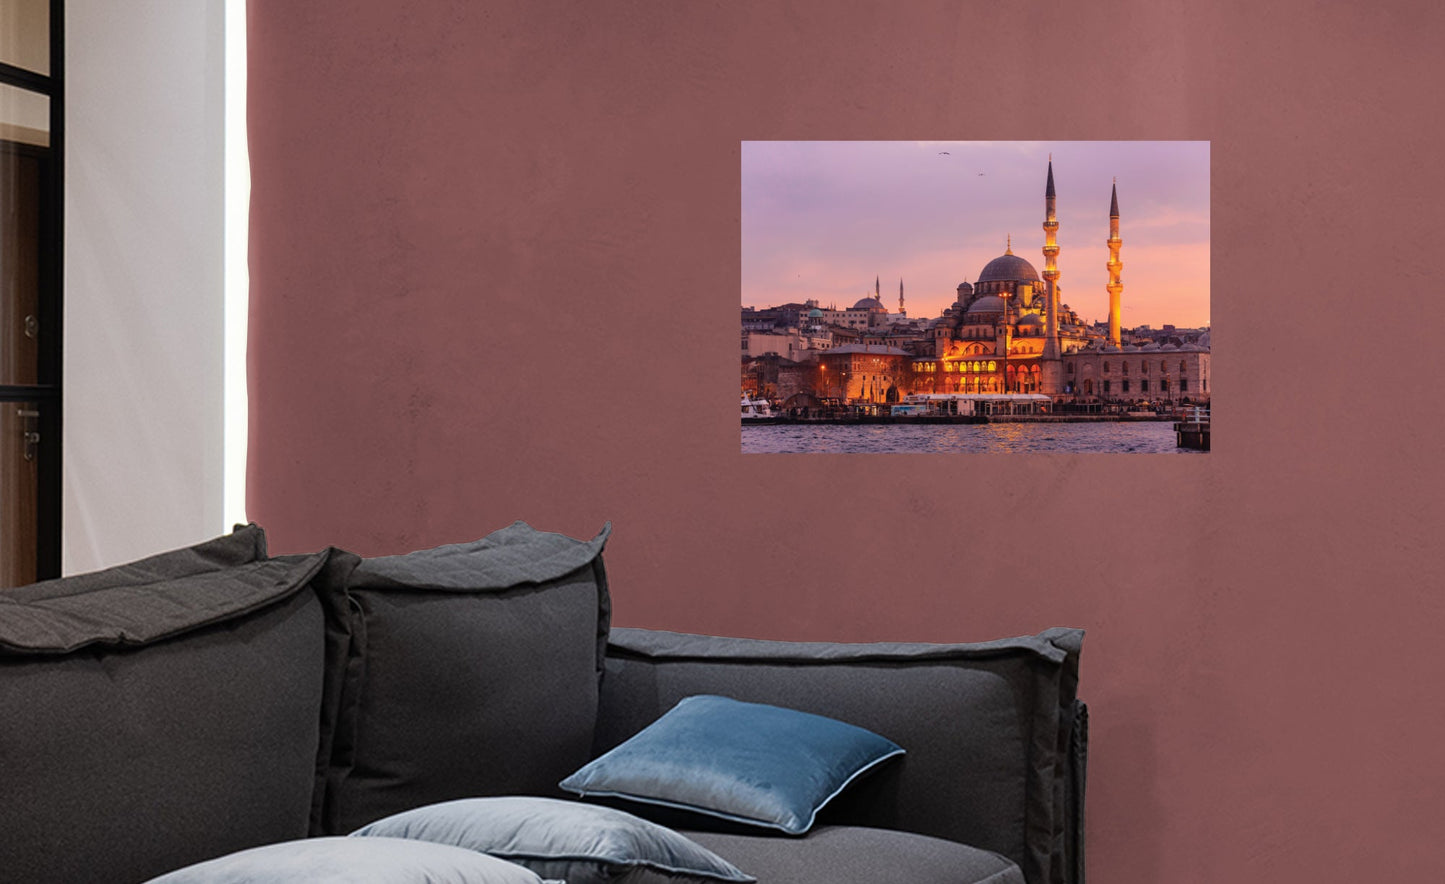 Popular Landmarks: Istanbul Realistic Poster - Removable Adhesive Decal